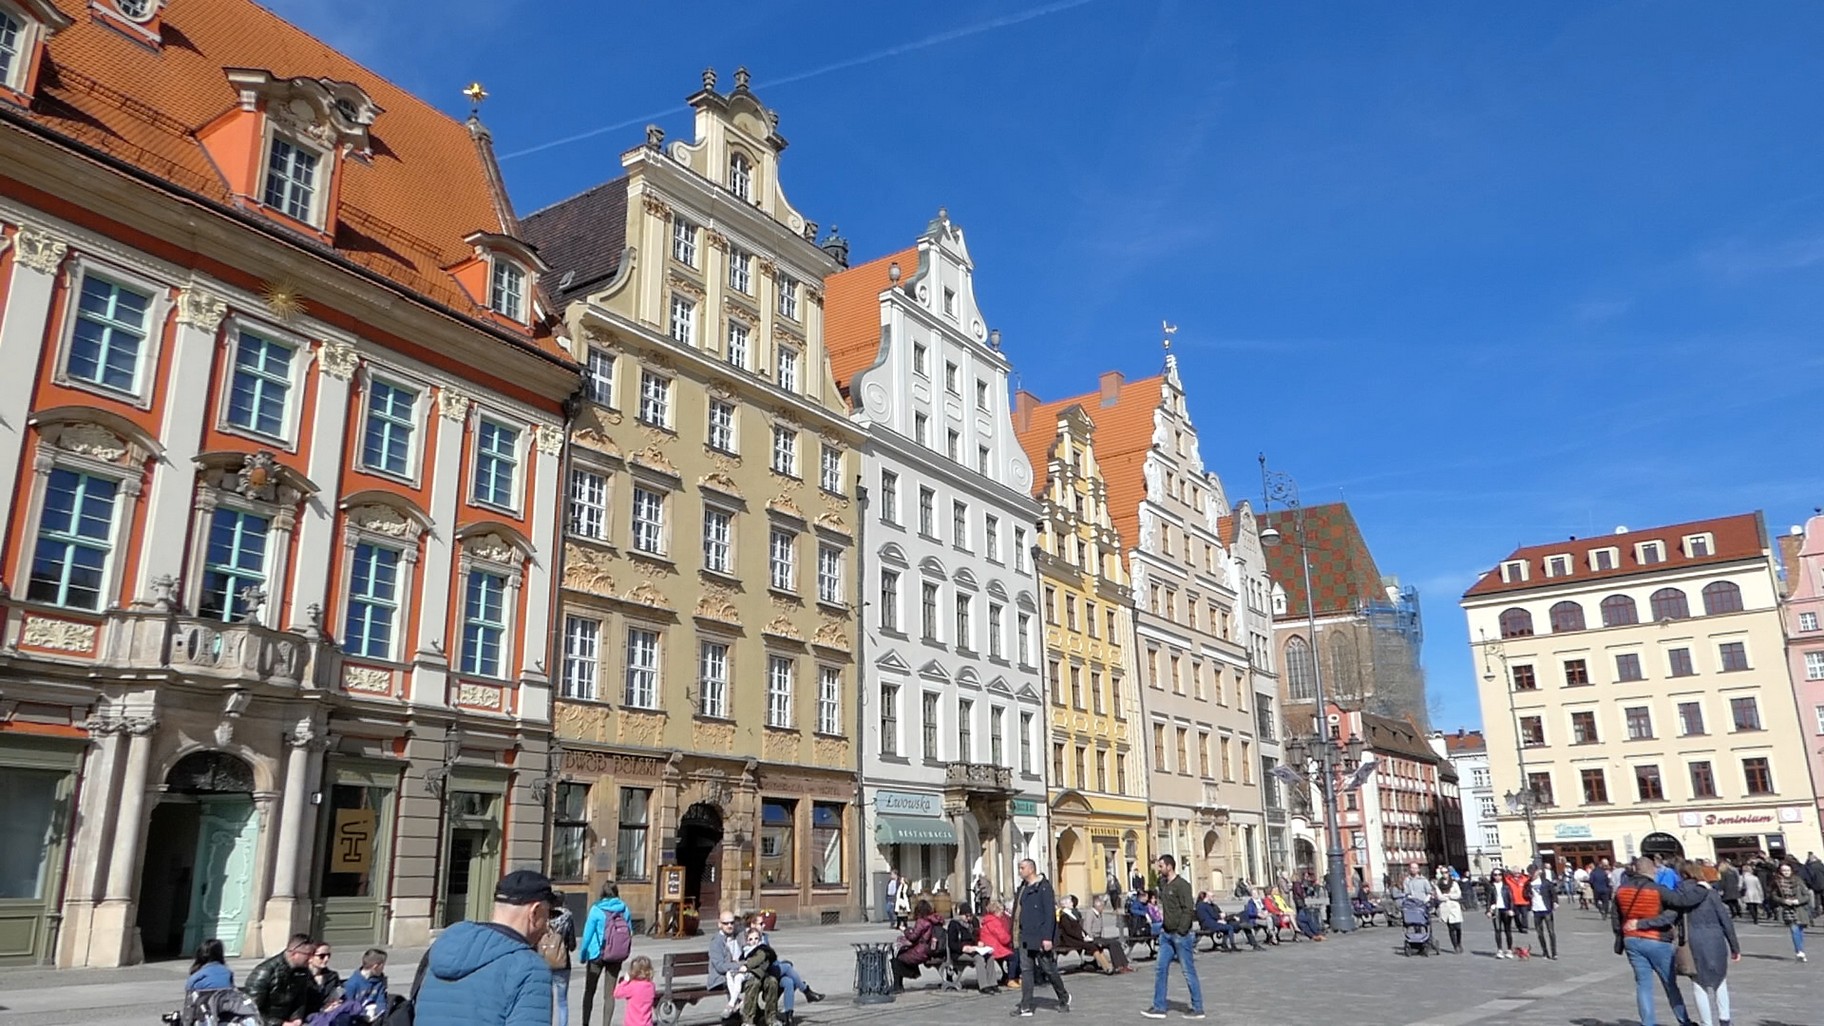 Wroclaw Old Town & Conspirators Tour